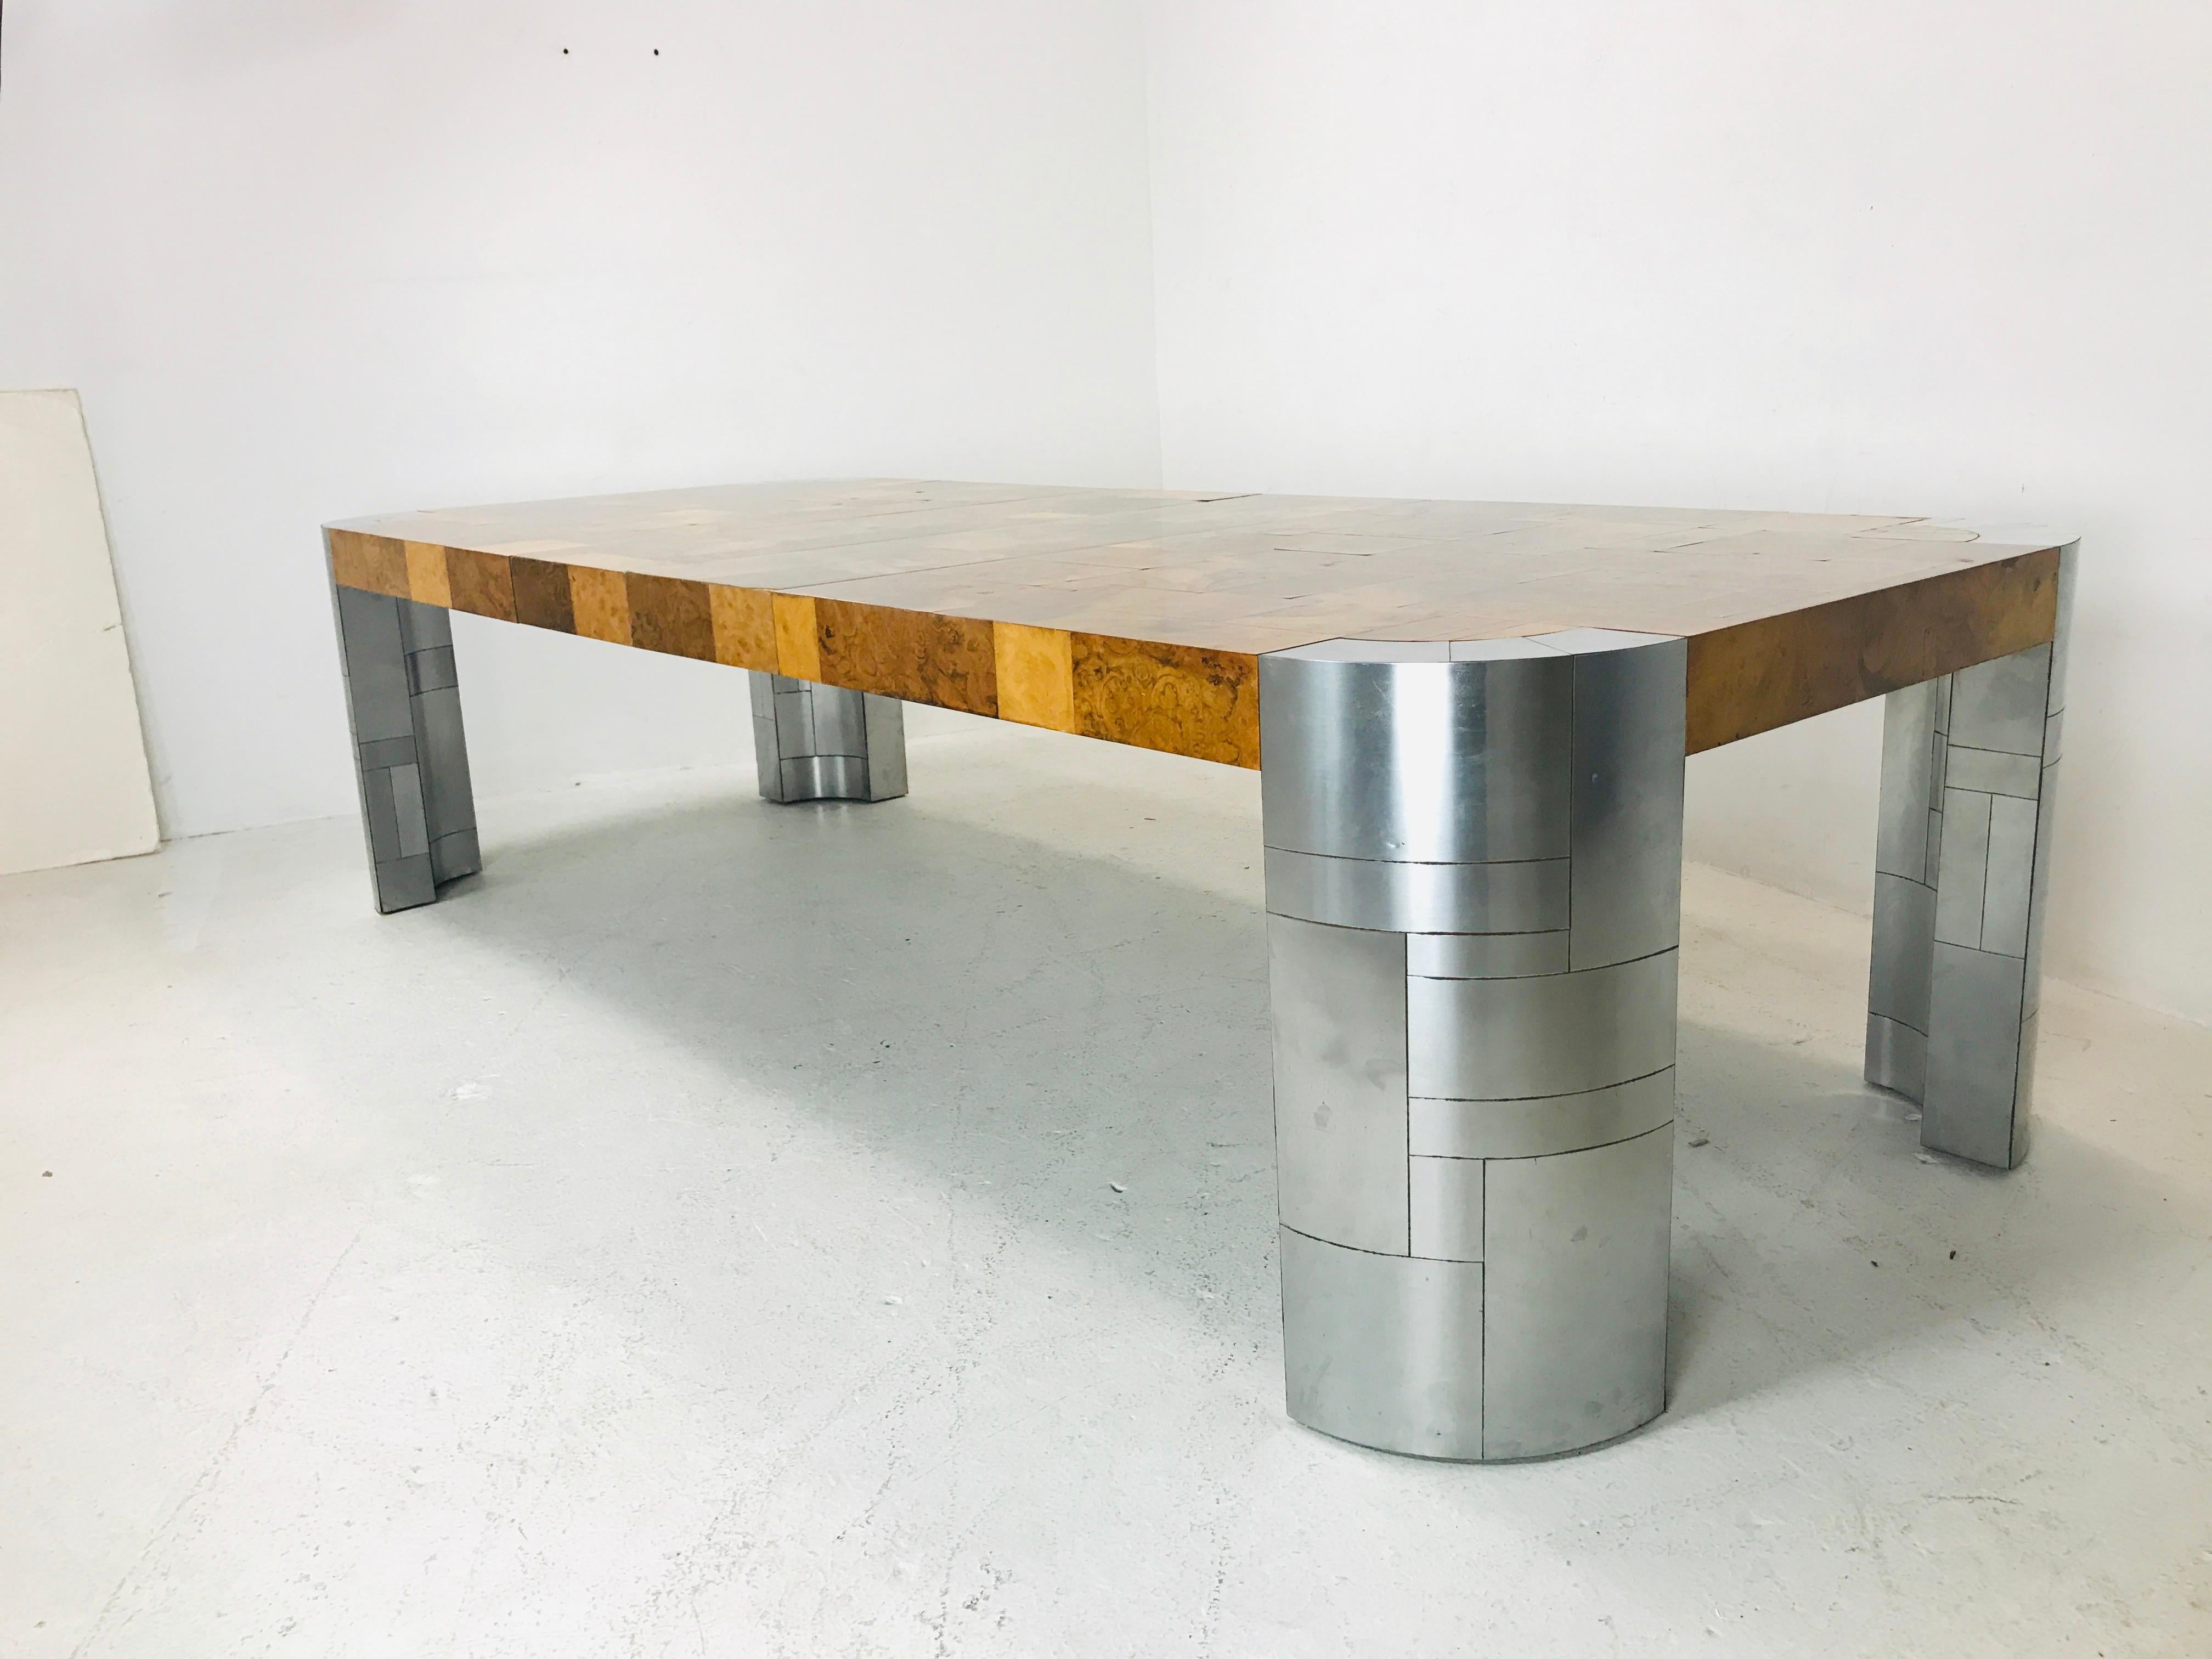 Large, commanding patchwork burl wood dining table with thick chrome legs. Includes 2 leaves that measure 14.75